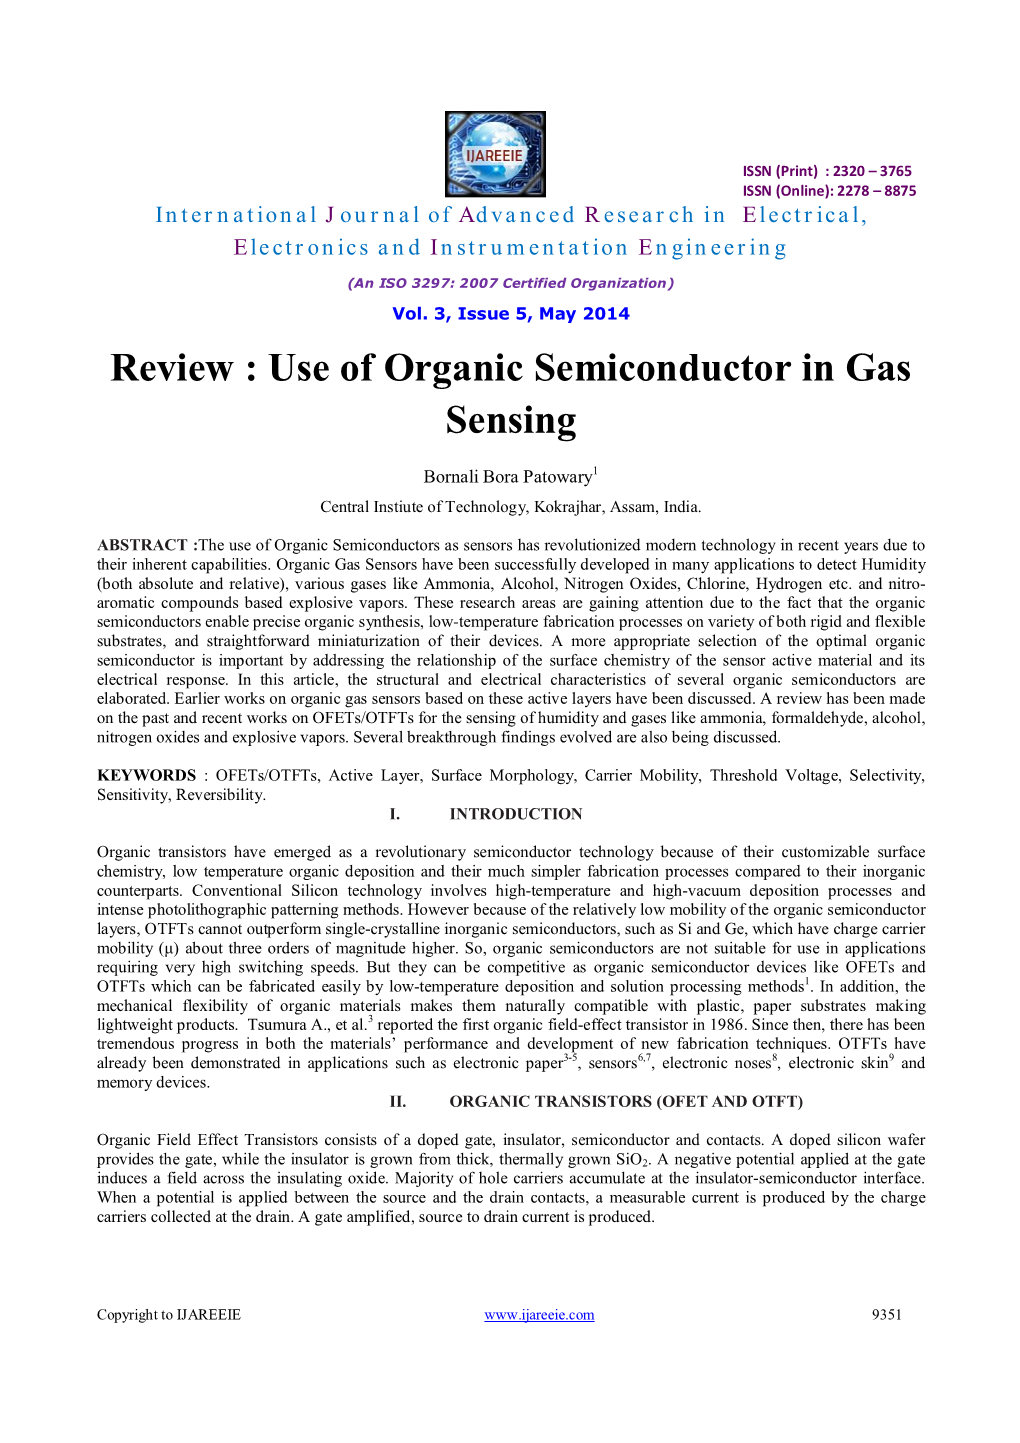 Review : Use of Organic Semiconductor in Gas Sensing